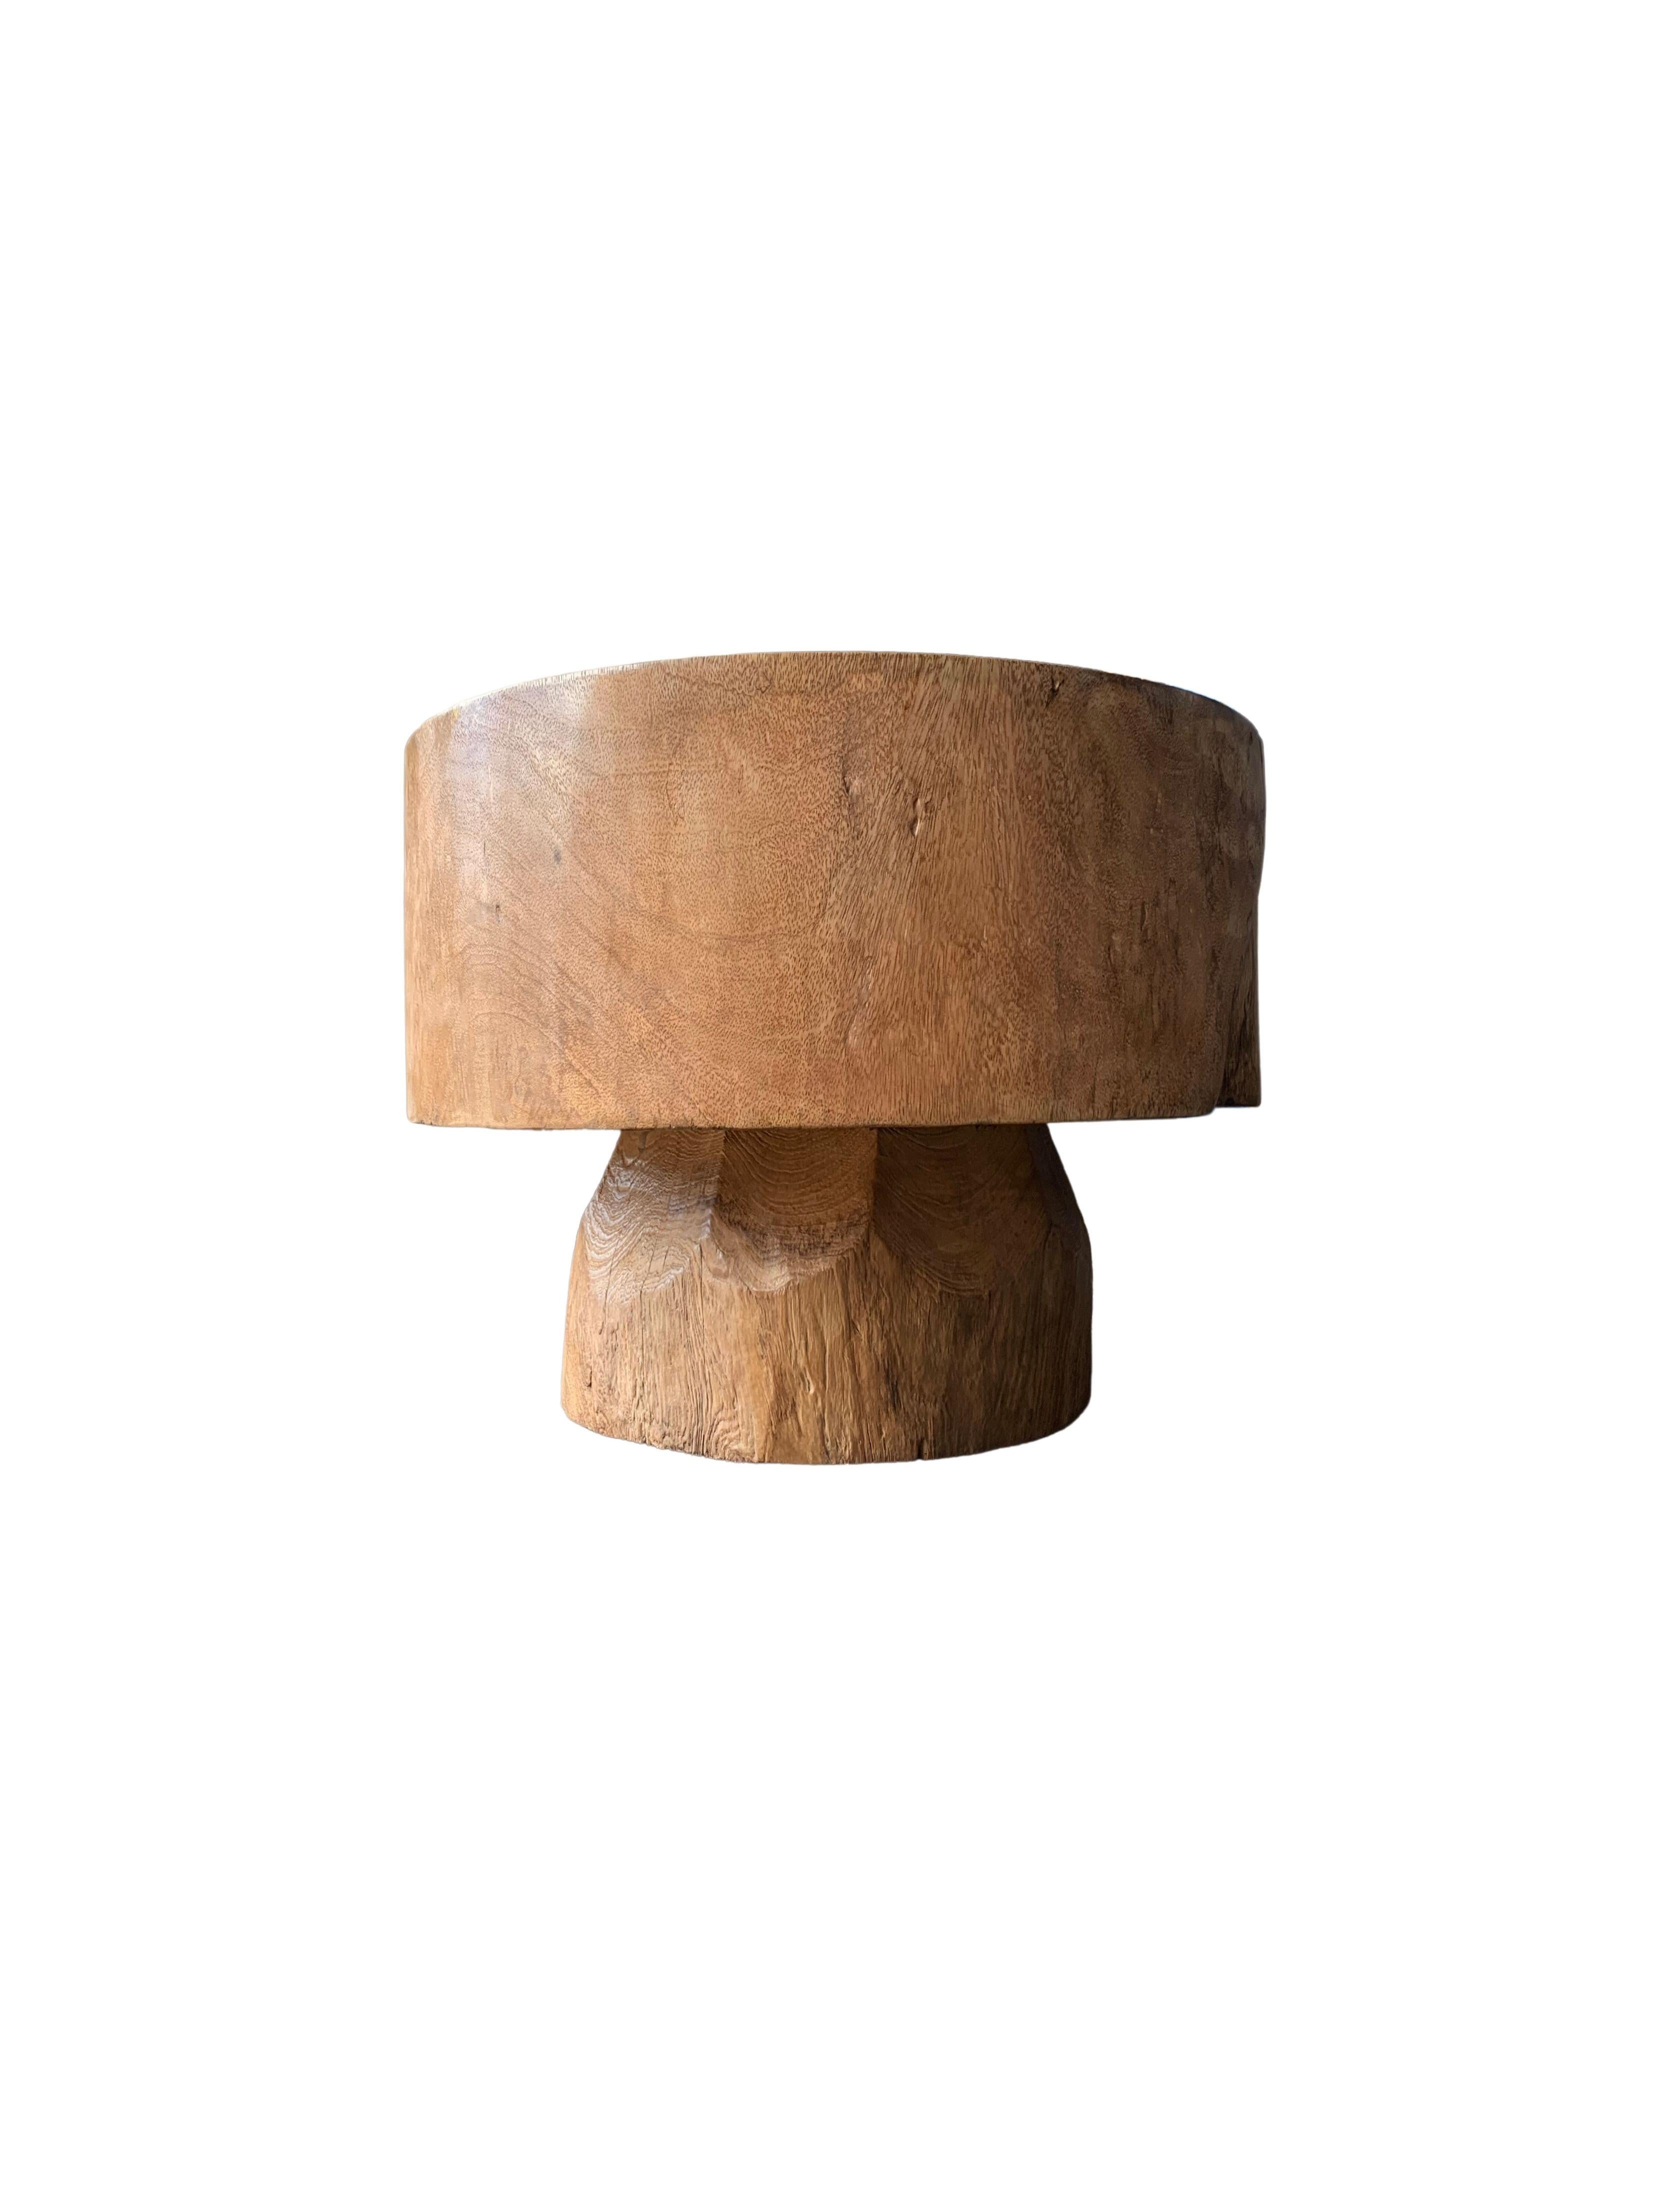 Organic Modern Sculptural Round Table Crafted from Solid Mango Wood, Natural Finish For Sale